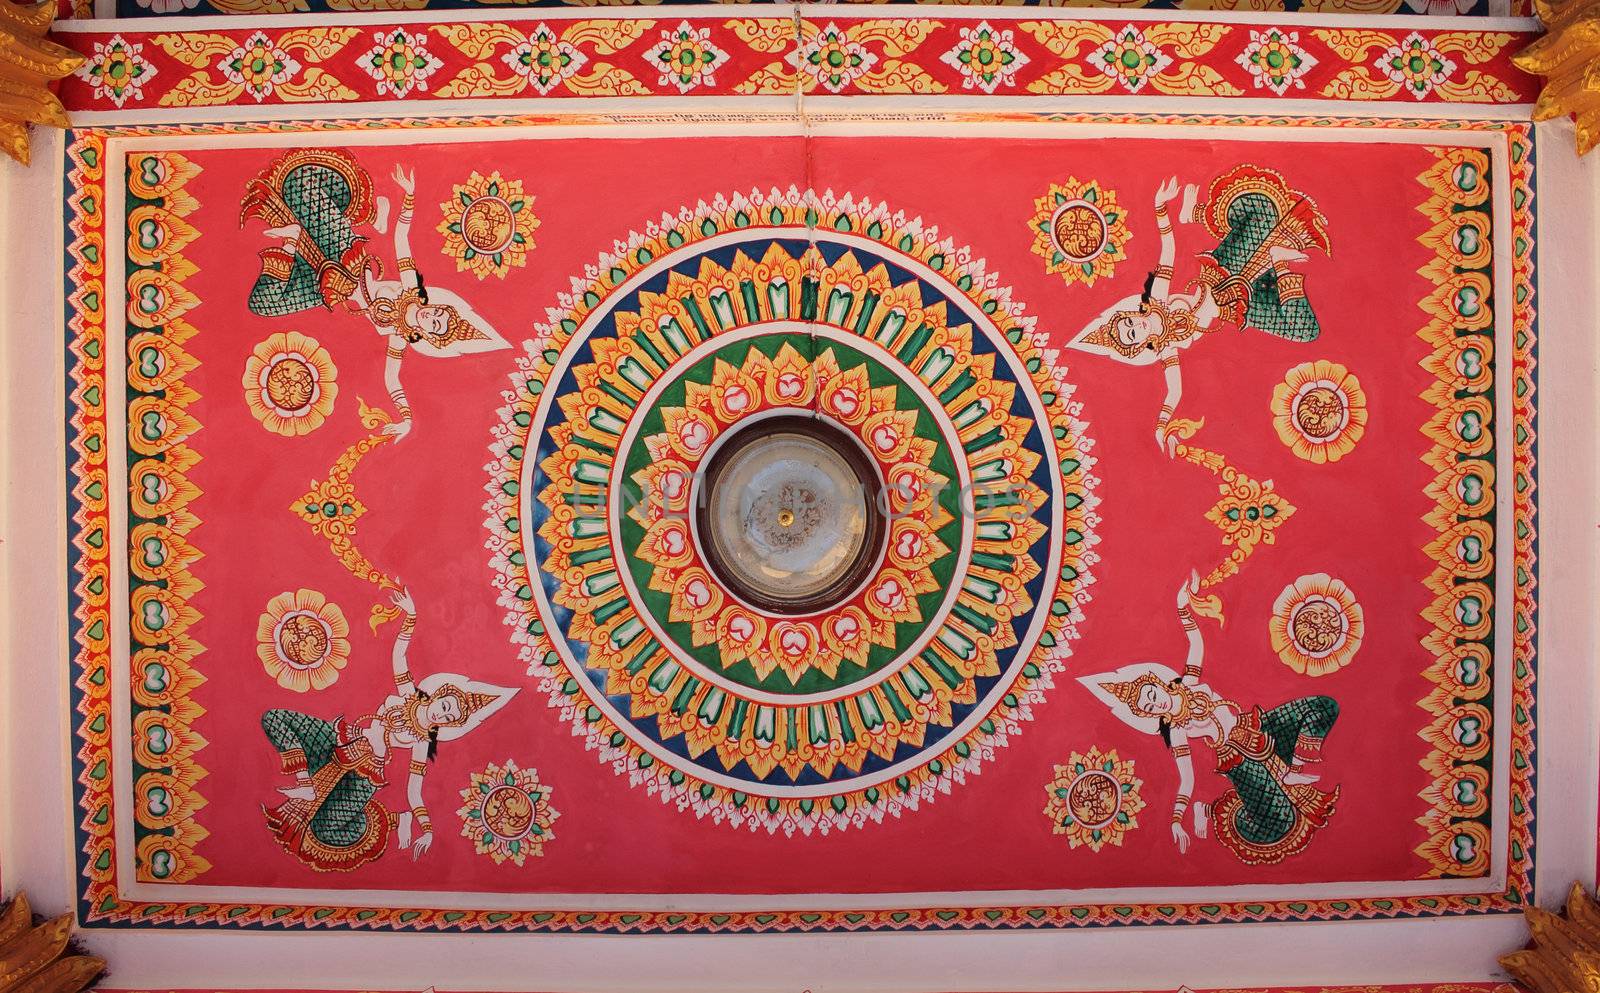 Decorated ceiling of temple in the capital of Vientiane, Laos